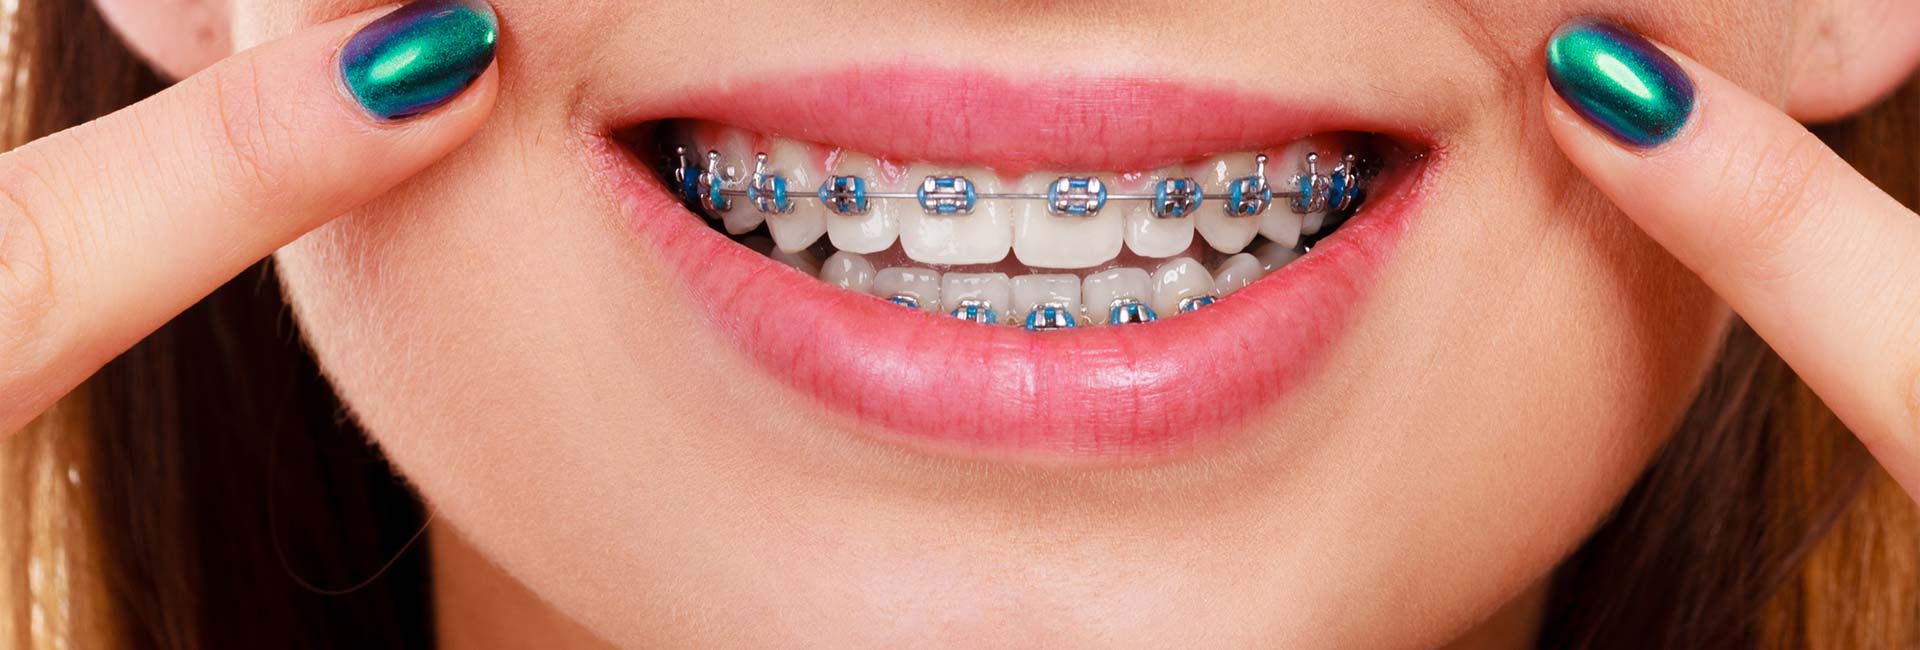 Woman smile showing her white teeth with blue braces